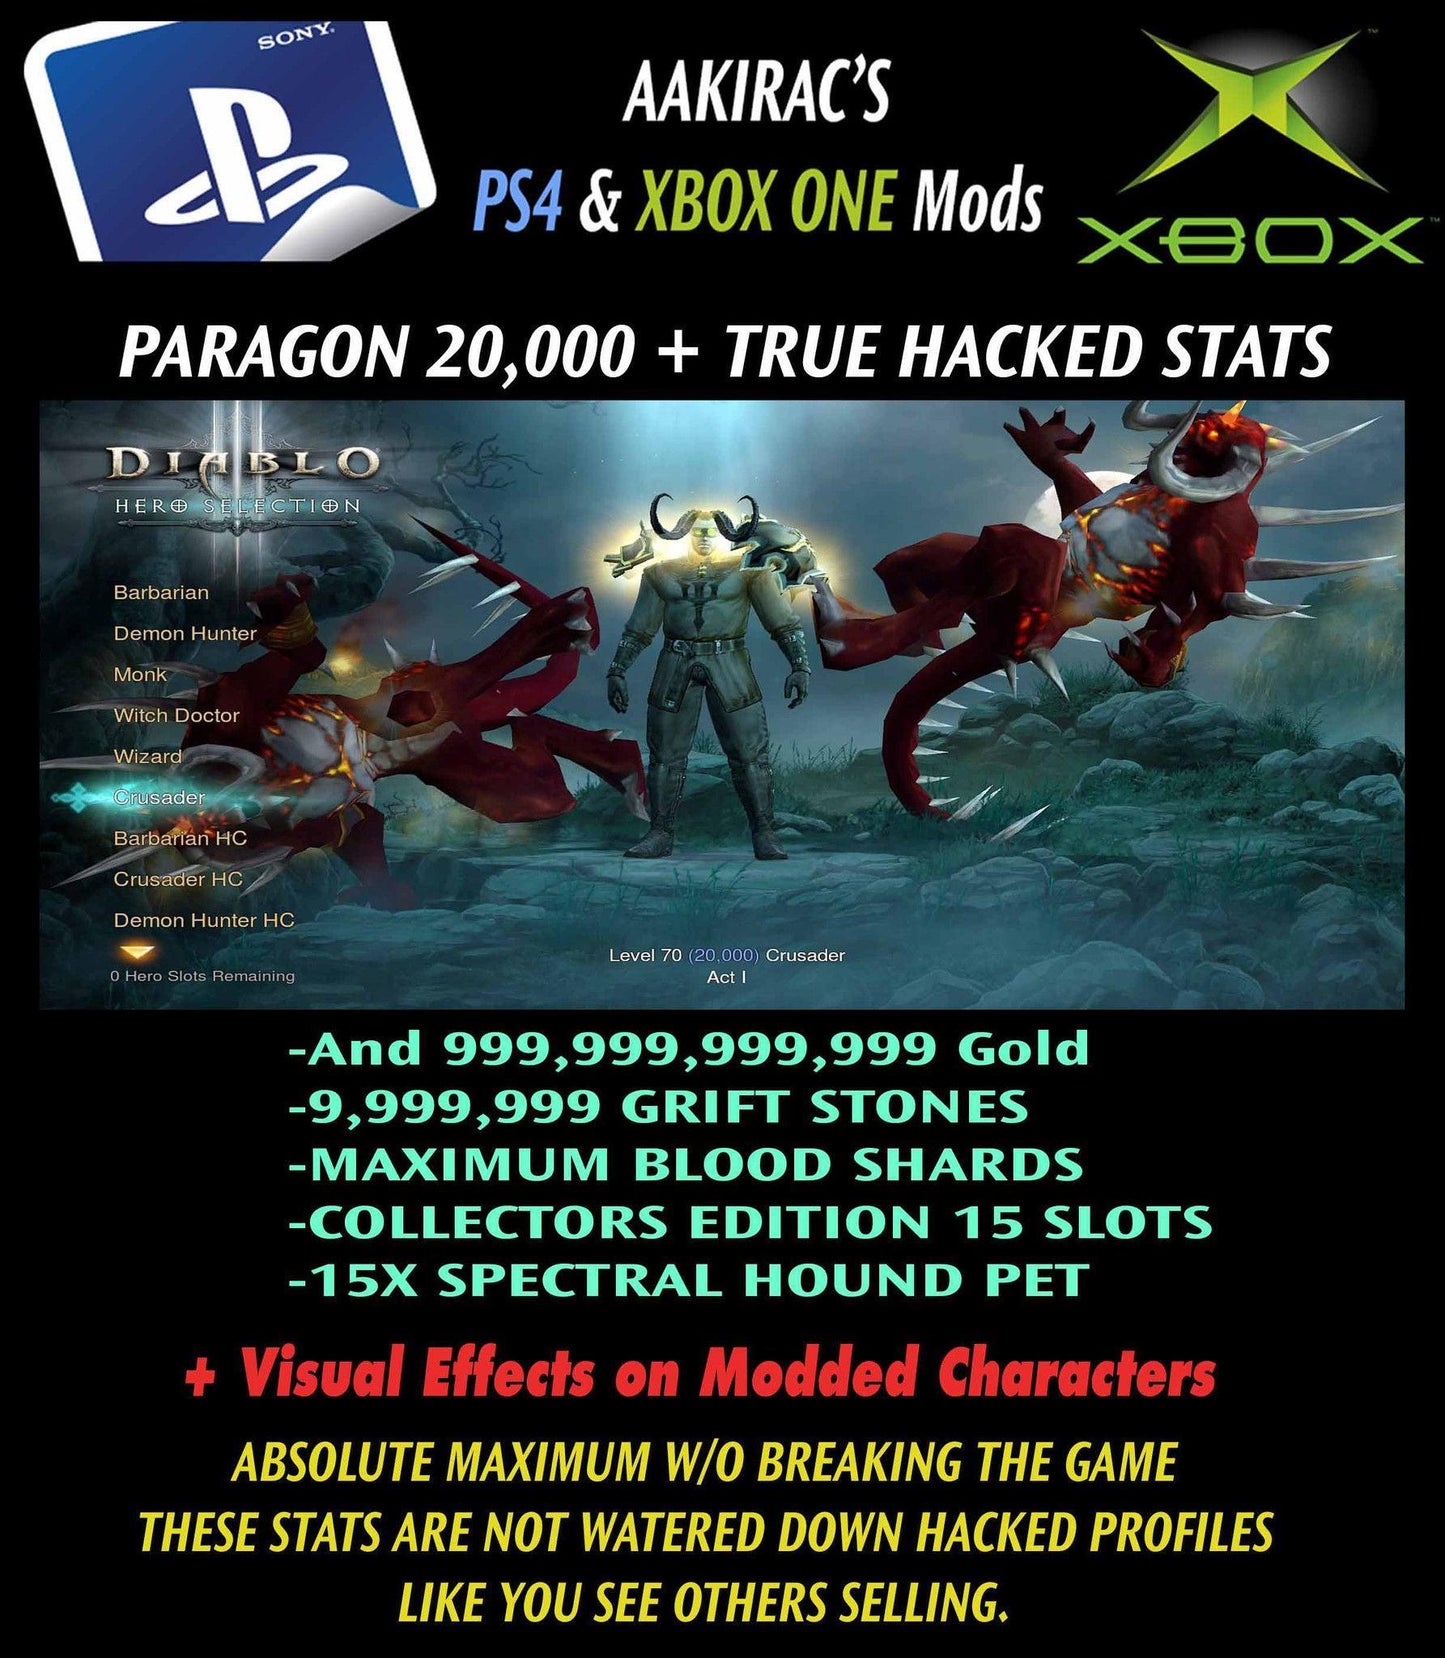 12x EXTREME Stat Modded Characters w/ Lingering Pets + Visual Effects Diablo 3 Mods ROS Seasonal and Non Seasonal Save Mod - Modded Items and Gear - Hacks - Cheats - Trainers for Playstation 4 - Playstation 5 - Nintendo Switch - Xbox One